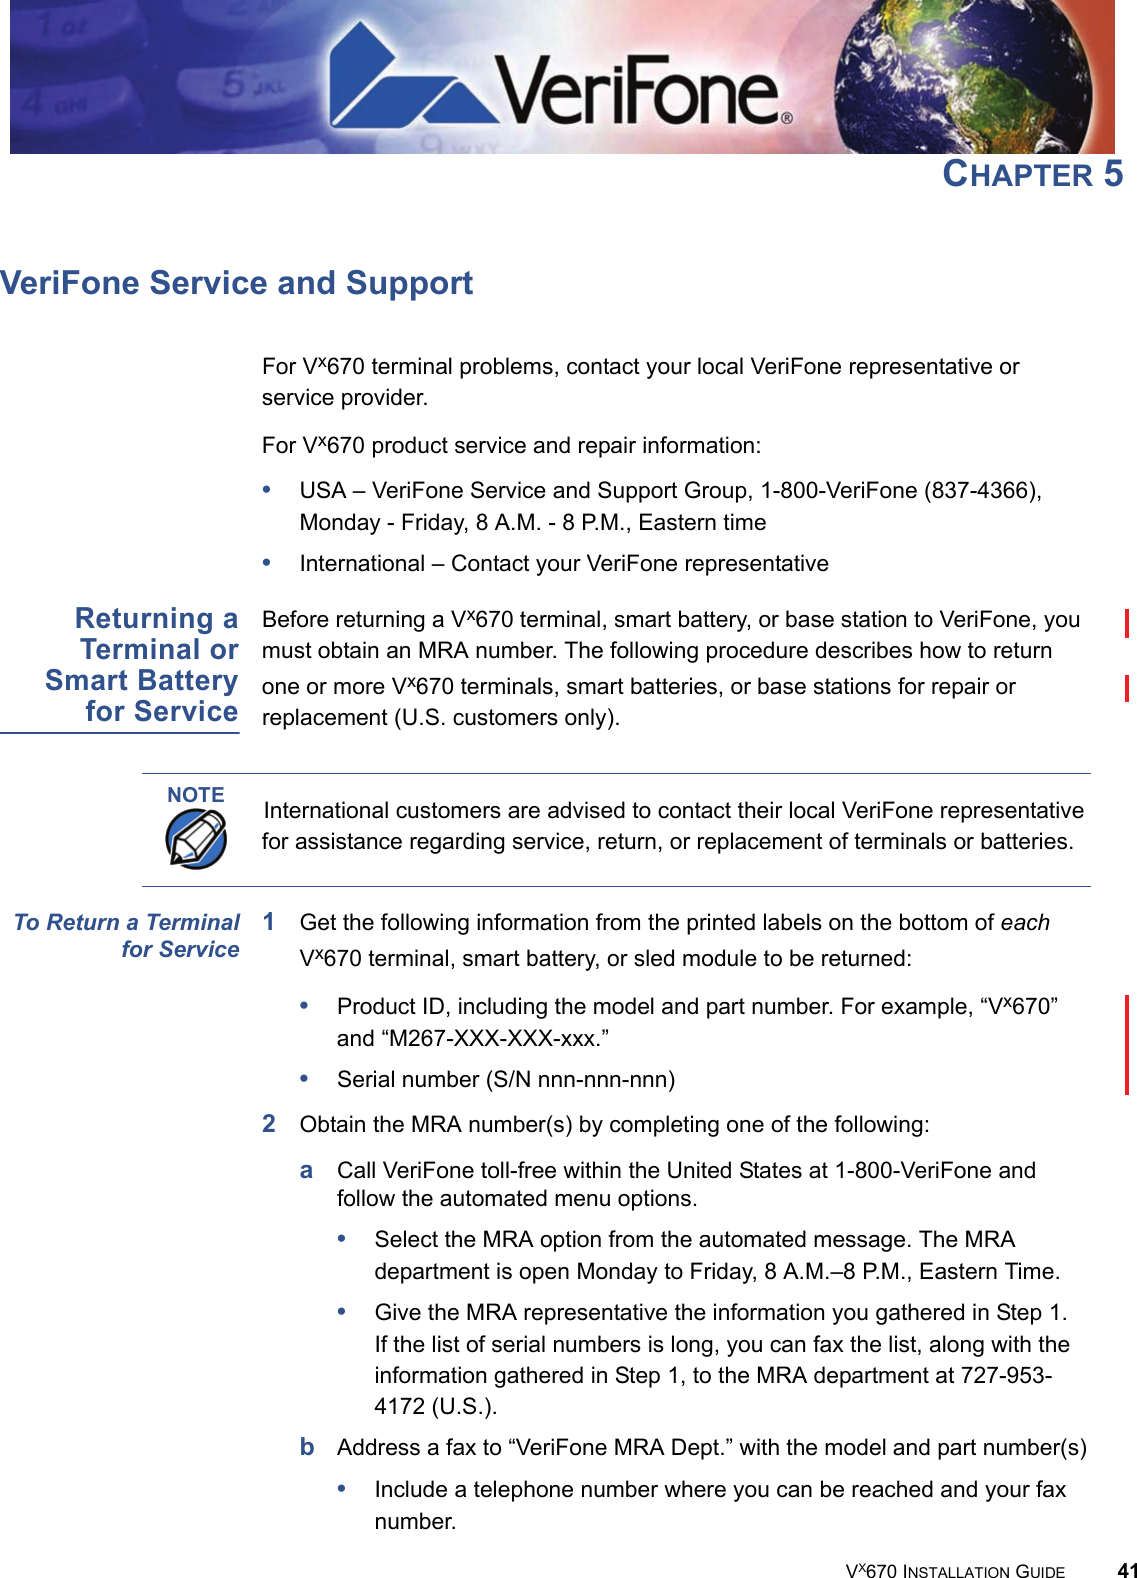 VX670 INSTALLATION GUIDE 41CHAPTER 5VeriFone Service and SupportFor Vx670 terminal problems, contact your local VeriFone representative or service provider. For Vx670 product service and repair information:•USA – VeriFone Service and Support Group, 1-800-VeriFone (837-4366), Monday - Friday, 8 A.M. - 8 P.M., Eastern time•International – Contact your VeriFone representative Returning aTerminal orSmart Batteryfor ServiceBefore returning a Vx670 terminal, smart battery, or base station to VeriFone, you must obtain an MRA number. The following procedure describes how to return one or more Vx670 terminals, smart batteries, or base stations for repair or replacement (U.S. customers only). To Return a Terminalfor Service1Get the following information from the printed labels on the bottom of each Vx670 terminal, smart battery, or sled module to be returned:•Product ID, including the model and part number. For example, “Vx670” and “M267-XXX-XXX-xxx.”•Serial number (S/N nnn-nnn-nnn)2Obtain the MRA number(s) by completing one of the following:aCall VeriFone toll-free within the United States at 1-800-VeriFone and follow the automated menu options.•Select the MRA option from the automated message. The MRA department is open Monday to Friday, 8 A.M.–8 P.M., Eastern Time.•Give the MRA representative the information you gathered in Step 1.If the list of serial numbers is long, you can fax the list, along with the information gathered in Step 1, to the MRA department at 727-953-4172 (U.S.).bAddress a fax to “VeriFone MRA Dept.” with the model and part number(s)•Include a telephone number where you can be reached and your fax number.NOTE International customers are advised to contact their local VeriFone representative for assistance regarding service, return, or replacement of terminals or batteries.